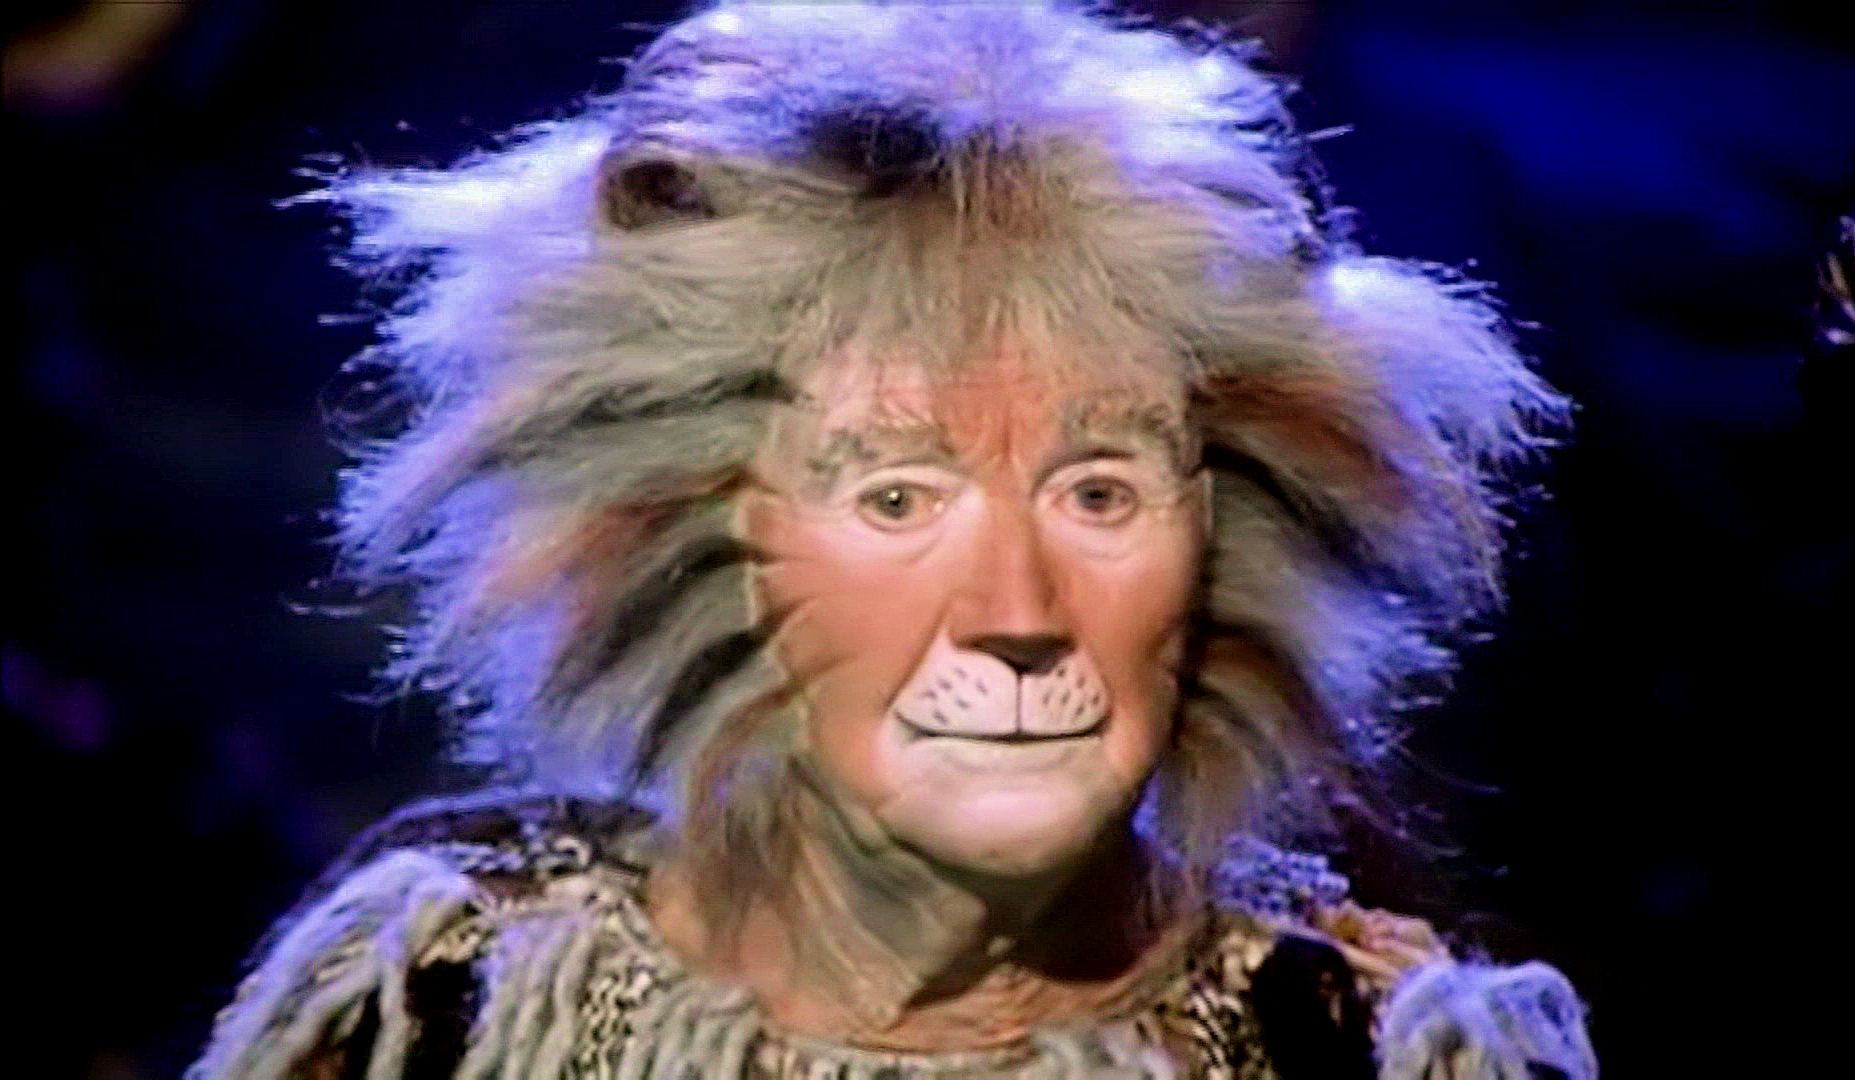 Screenshot from Cats (1998) (1) featuring John Mills as Gus the Theatre Cat